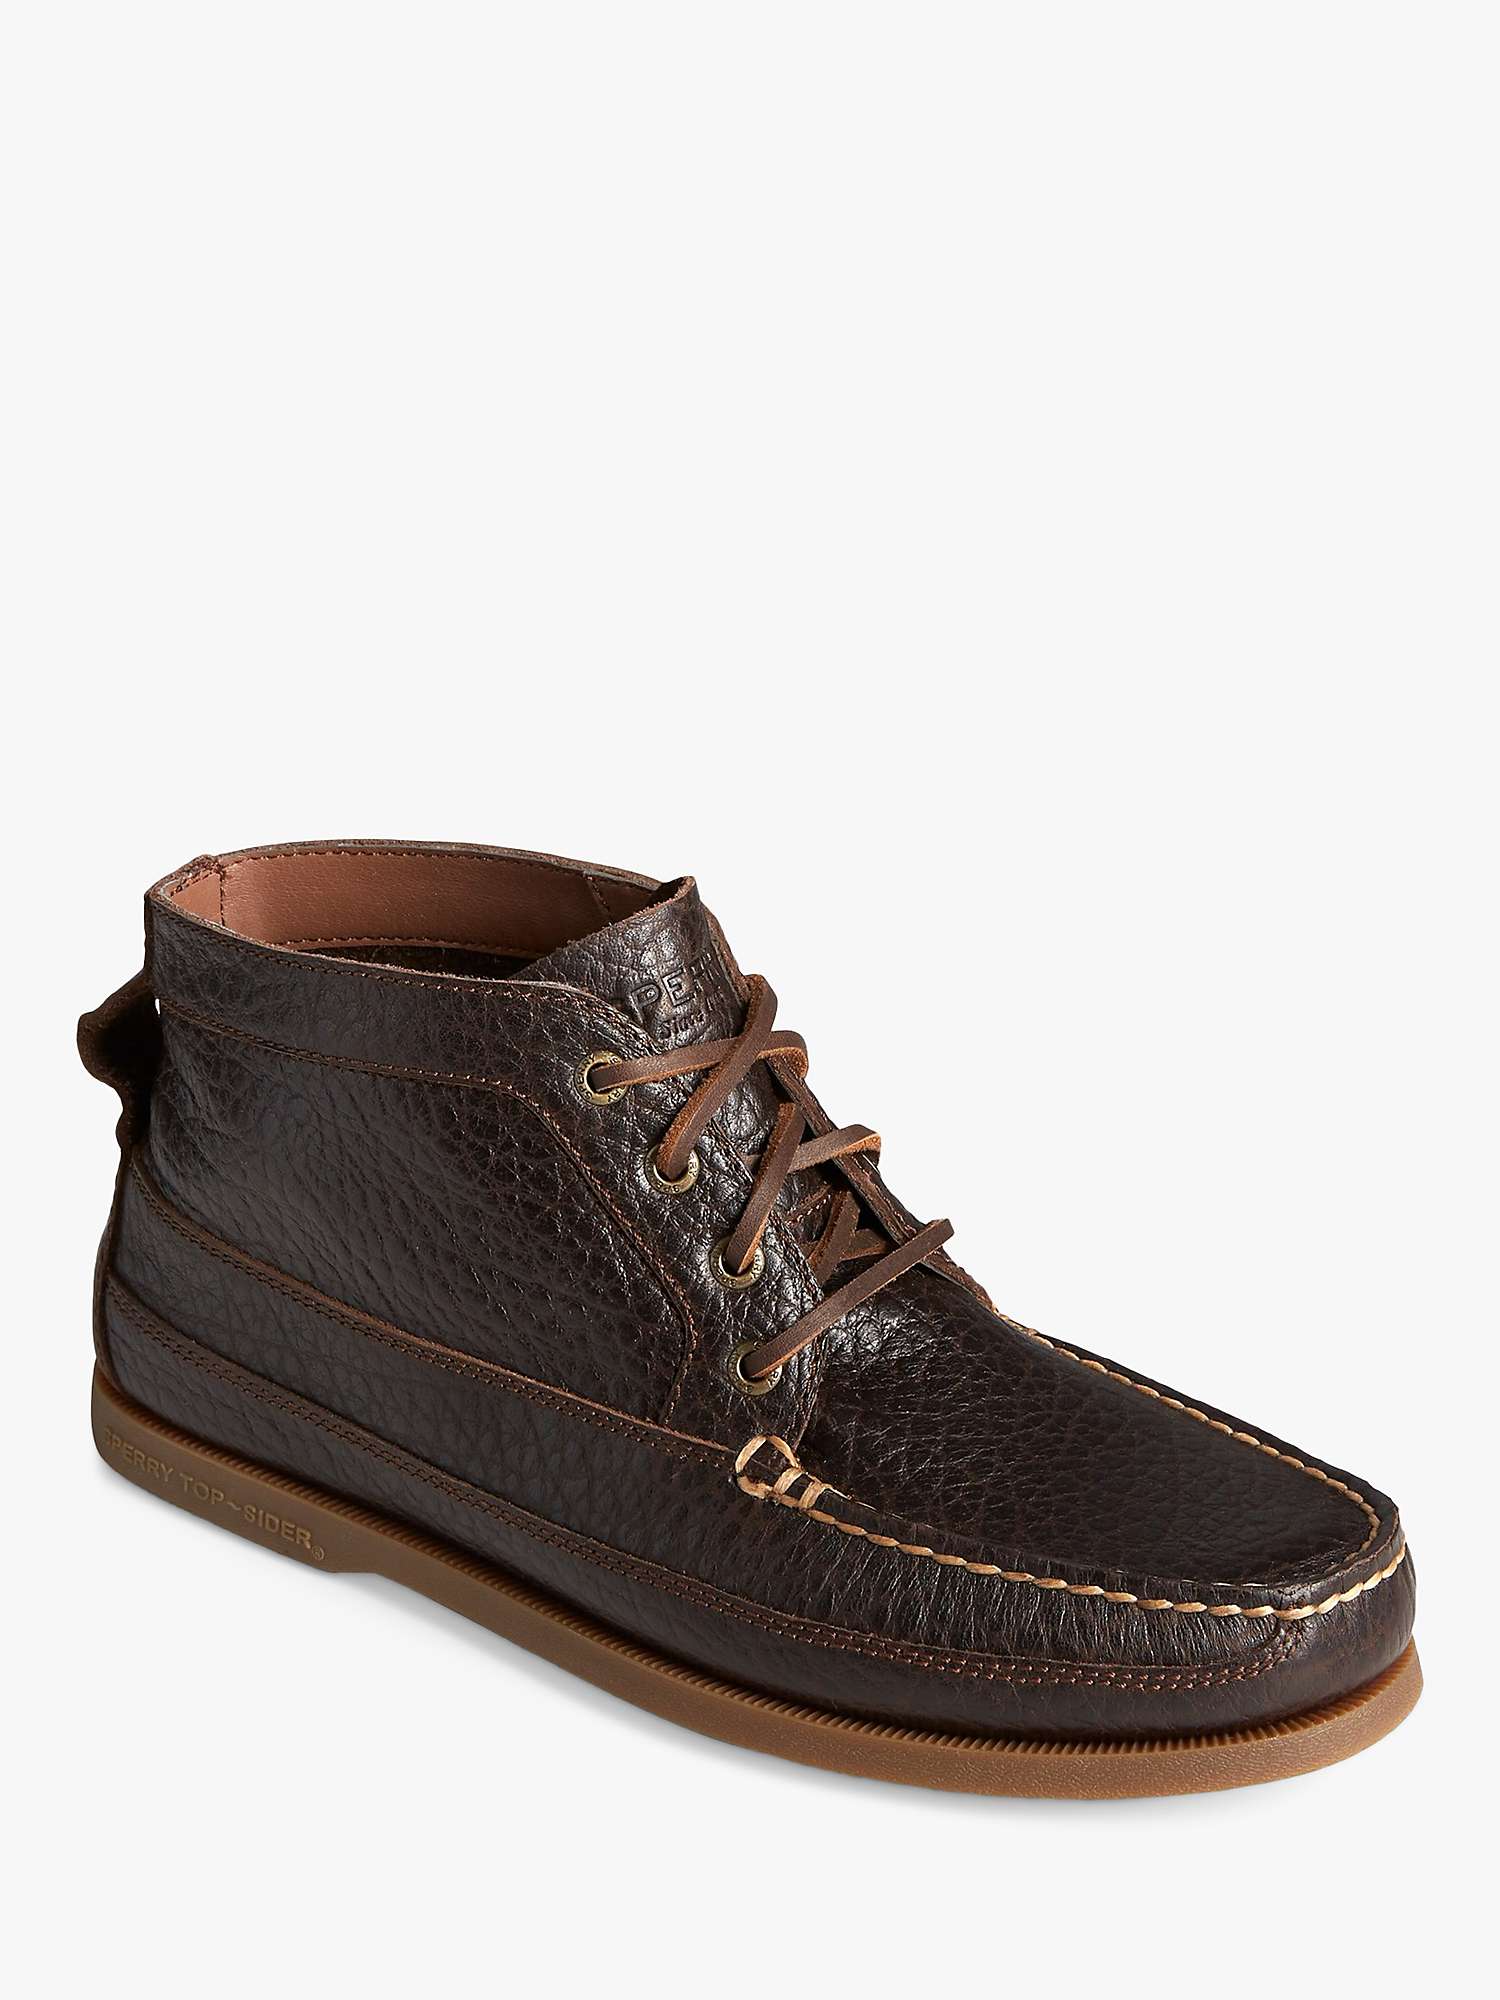 Buy Sperry Authentic Original Tumbled Leather Boat Chukka Boots Online at johnlewis.com